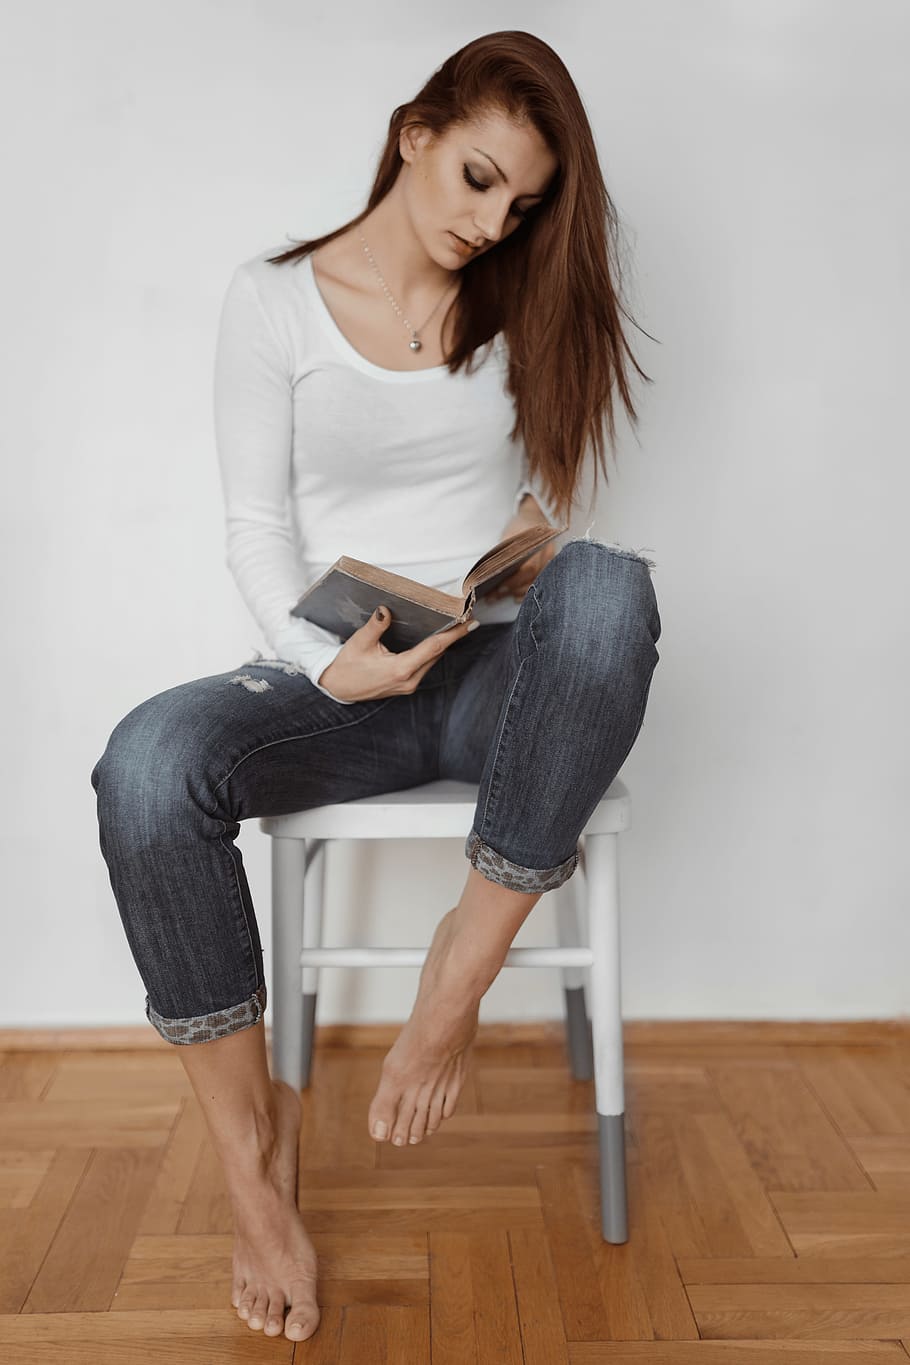 Beautiful young woman reading a book, adult, caucasian, female